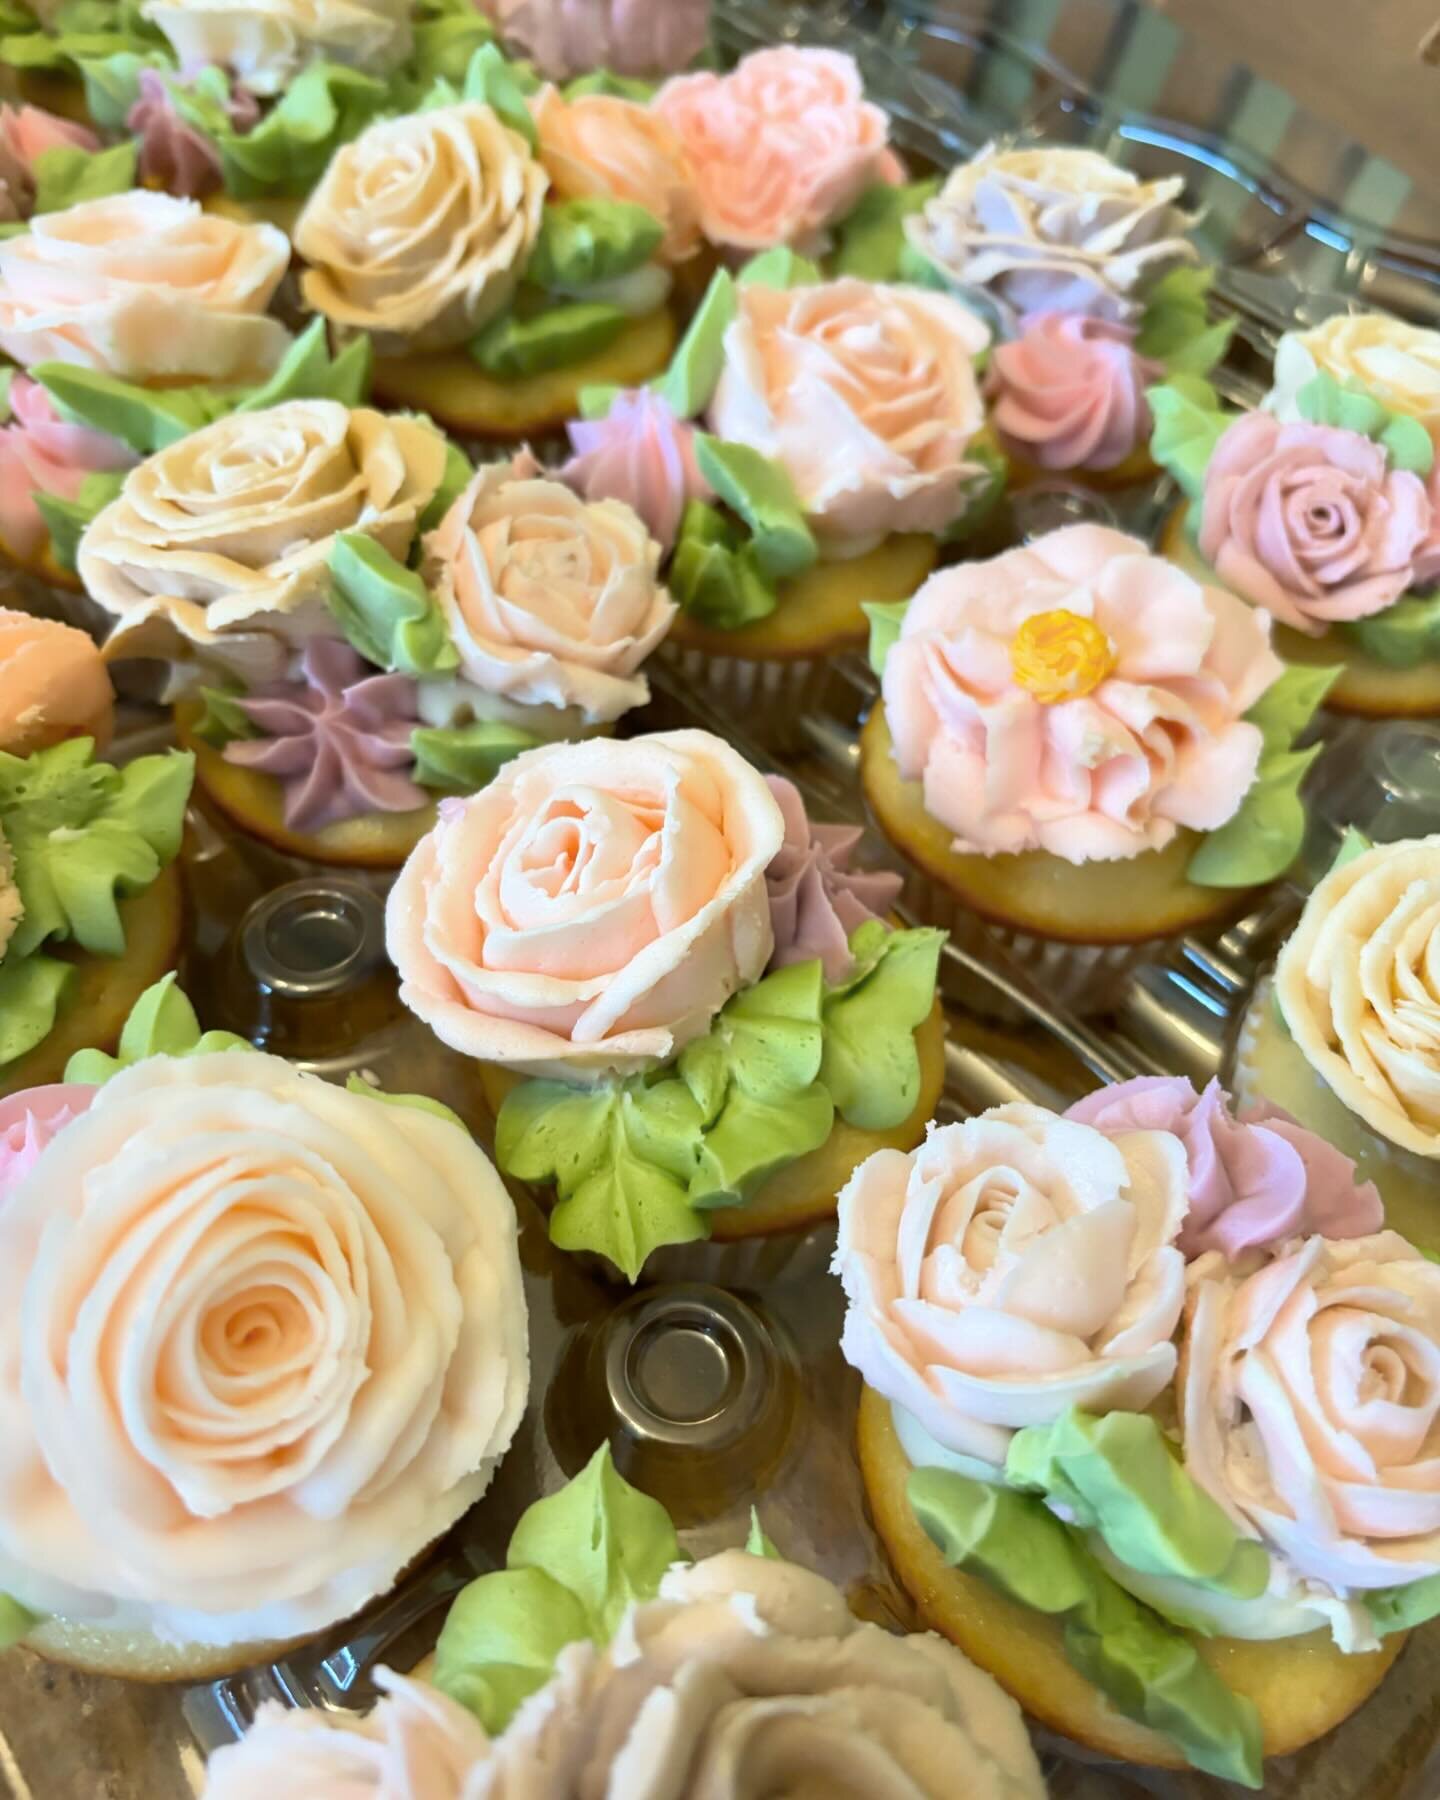 &ldquo;A baby is blooming&rdquo; Vanilla cupcakes with buttercream frosting 
.
.
.
.
.
.
#buttercreamflowerscake #beautifulcupcakes #custombakery #decoratedcupcakes #buttercreamcupcake #cupcakesoftheday #cakedetails #buttercreamcakedesign #custommade